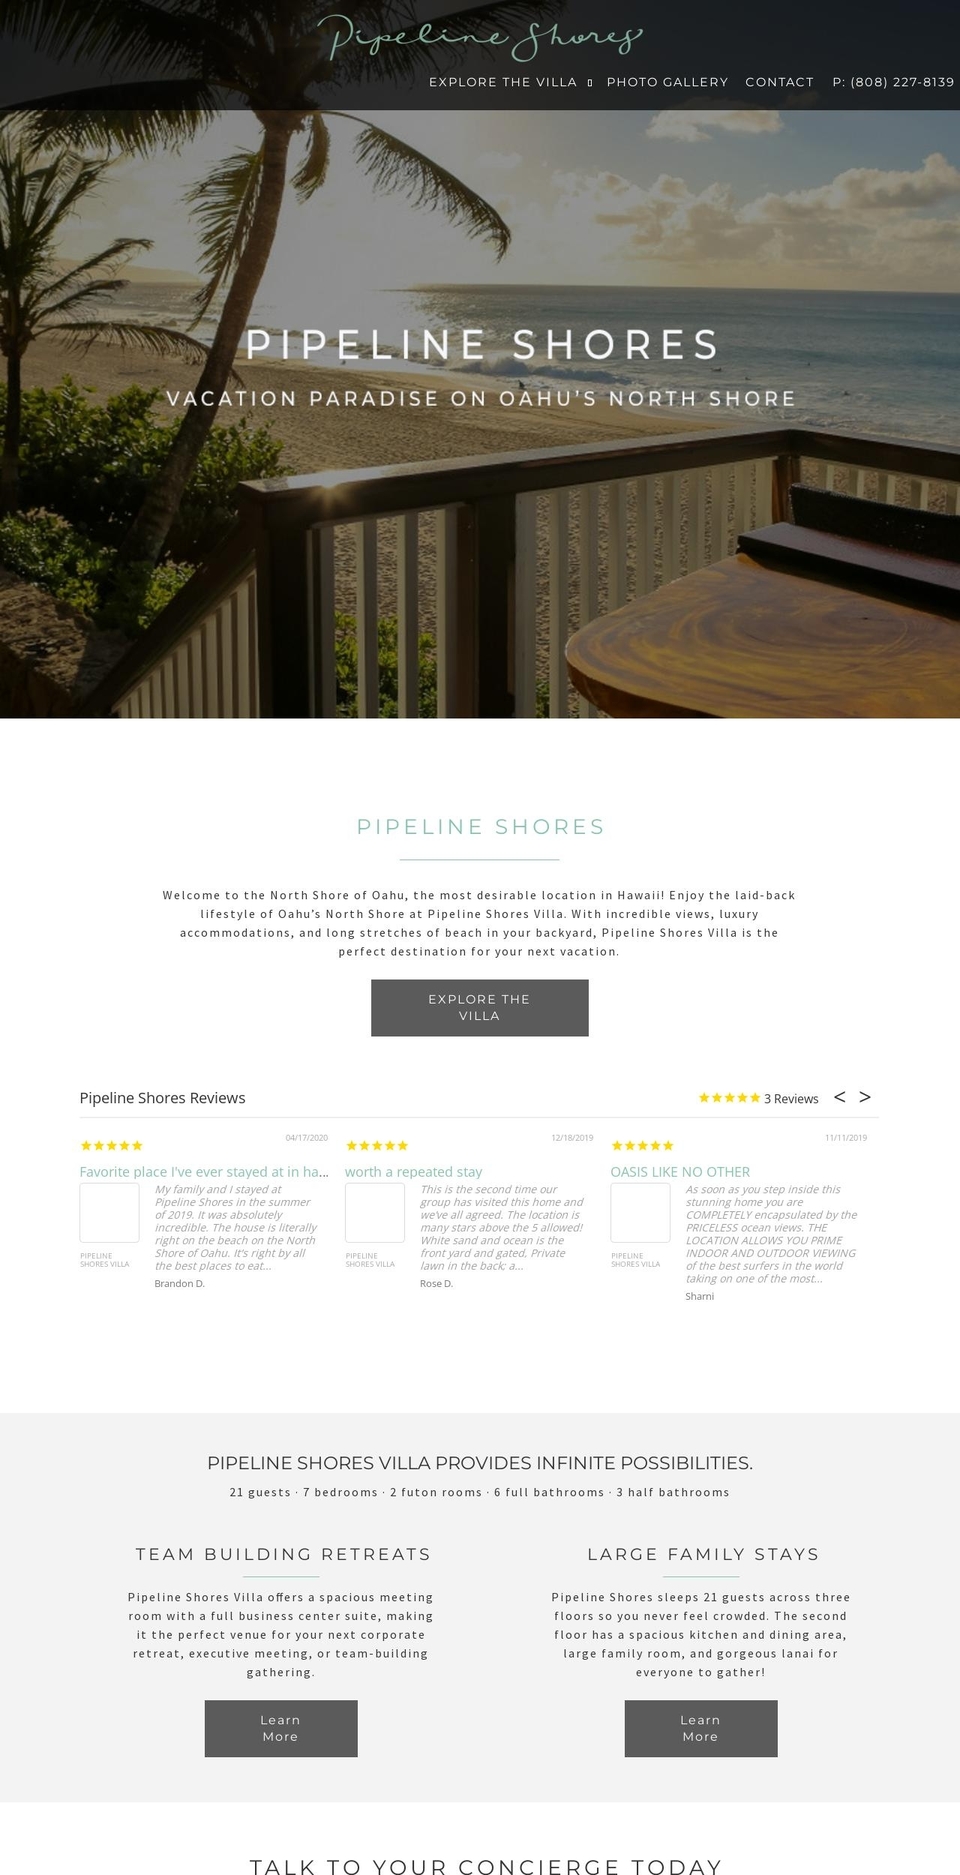 Timber Shopify theme site example pipelineshores.com